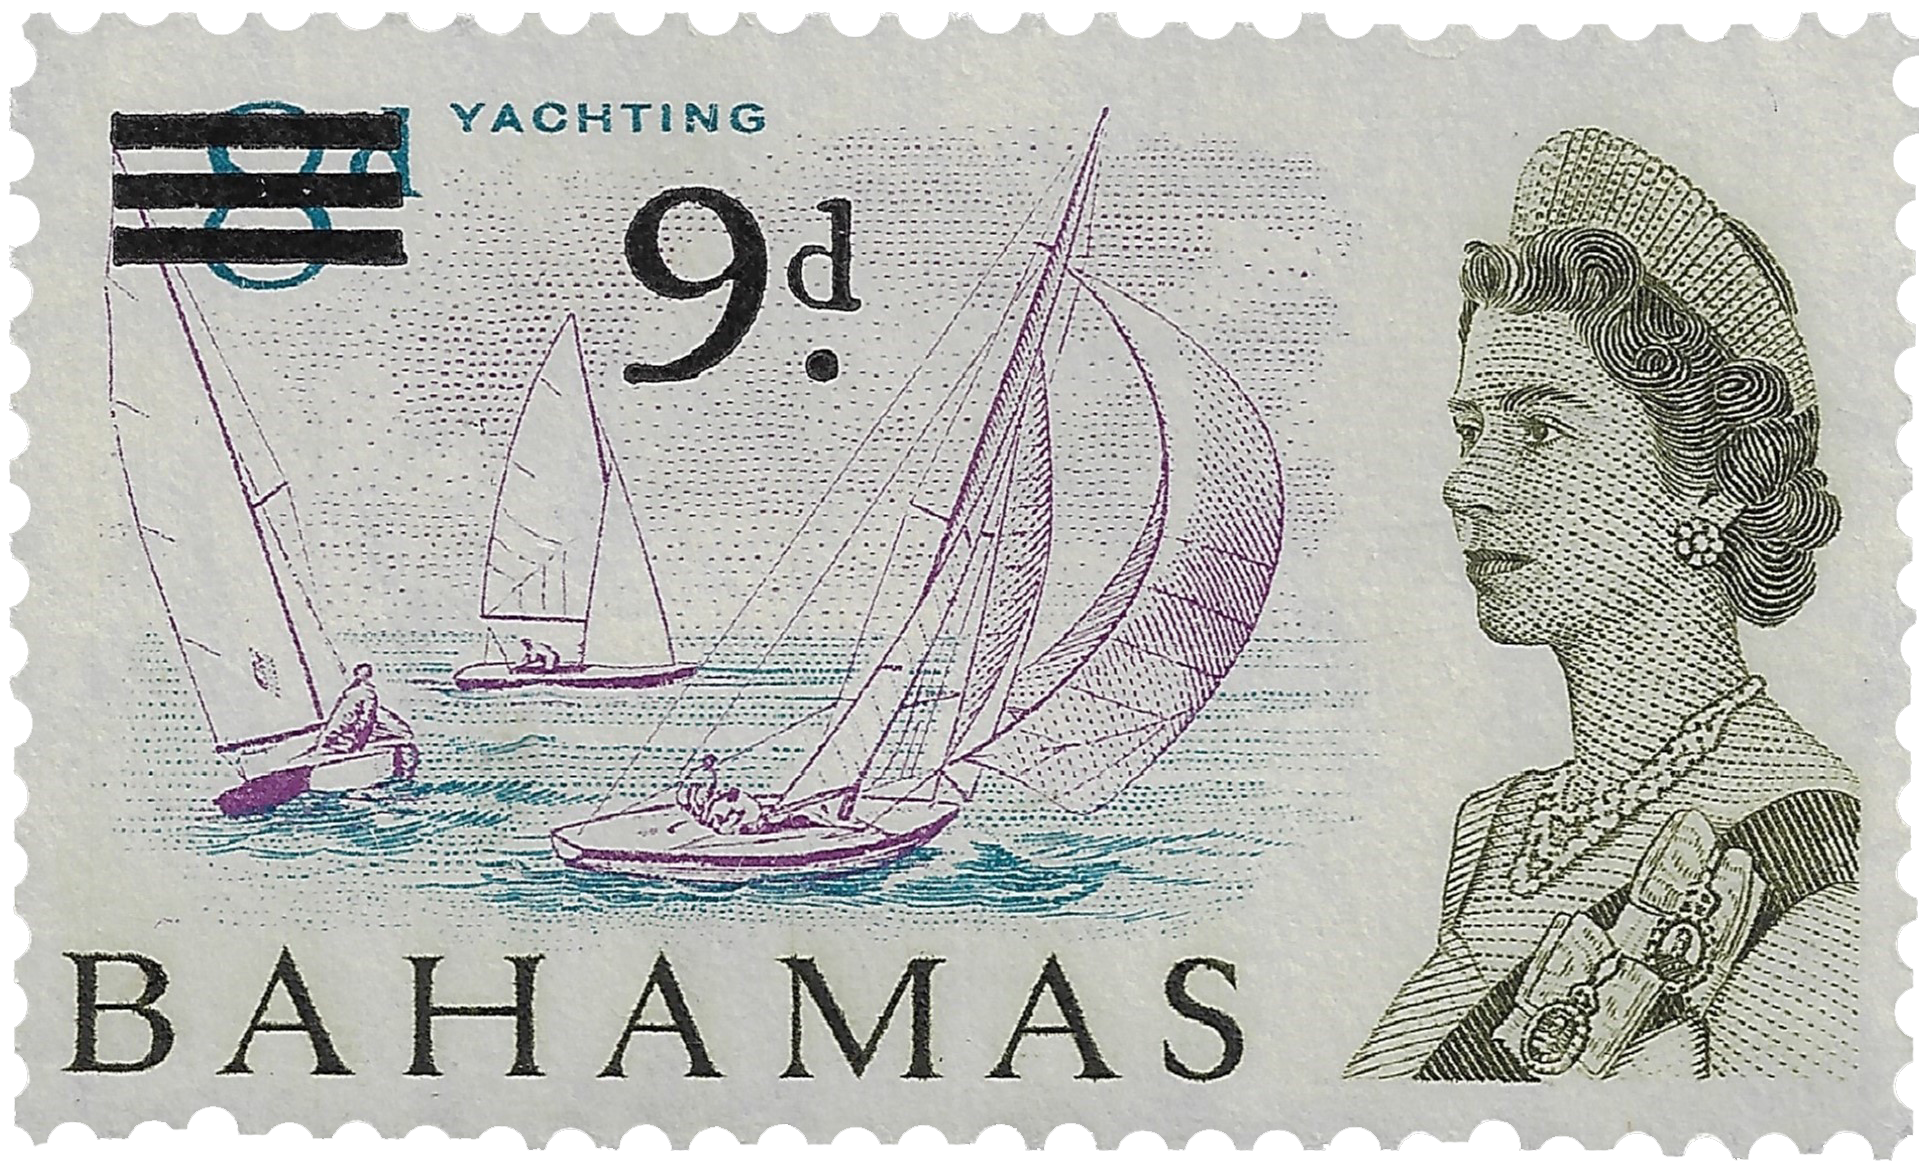 9d 1965, Yachting